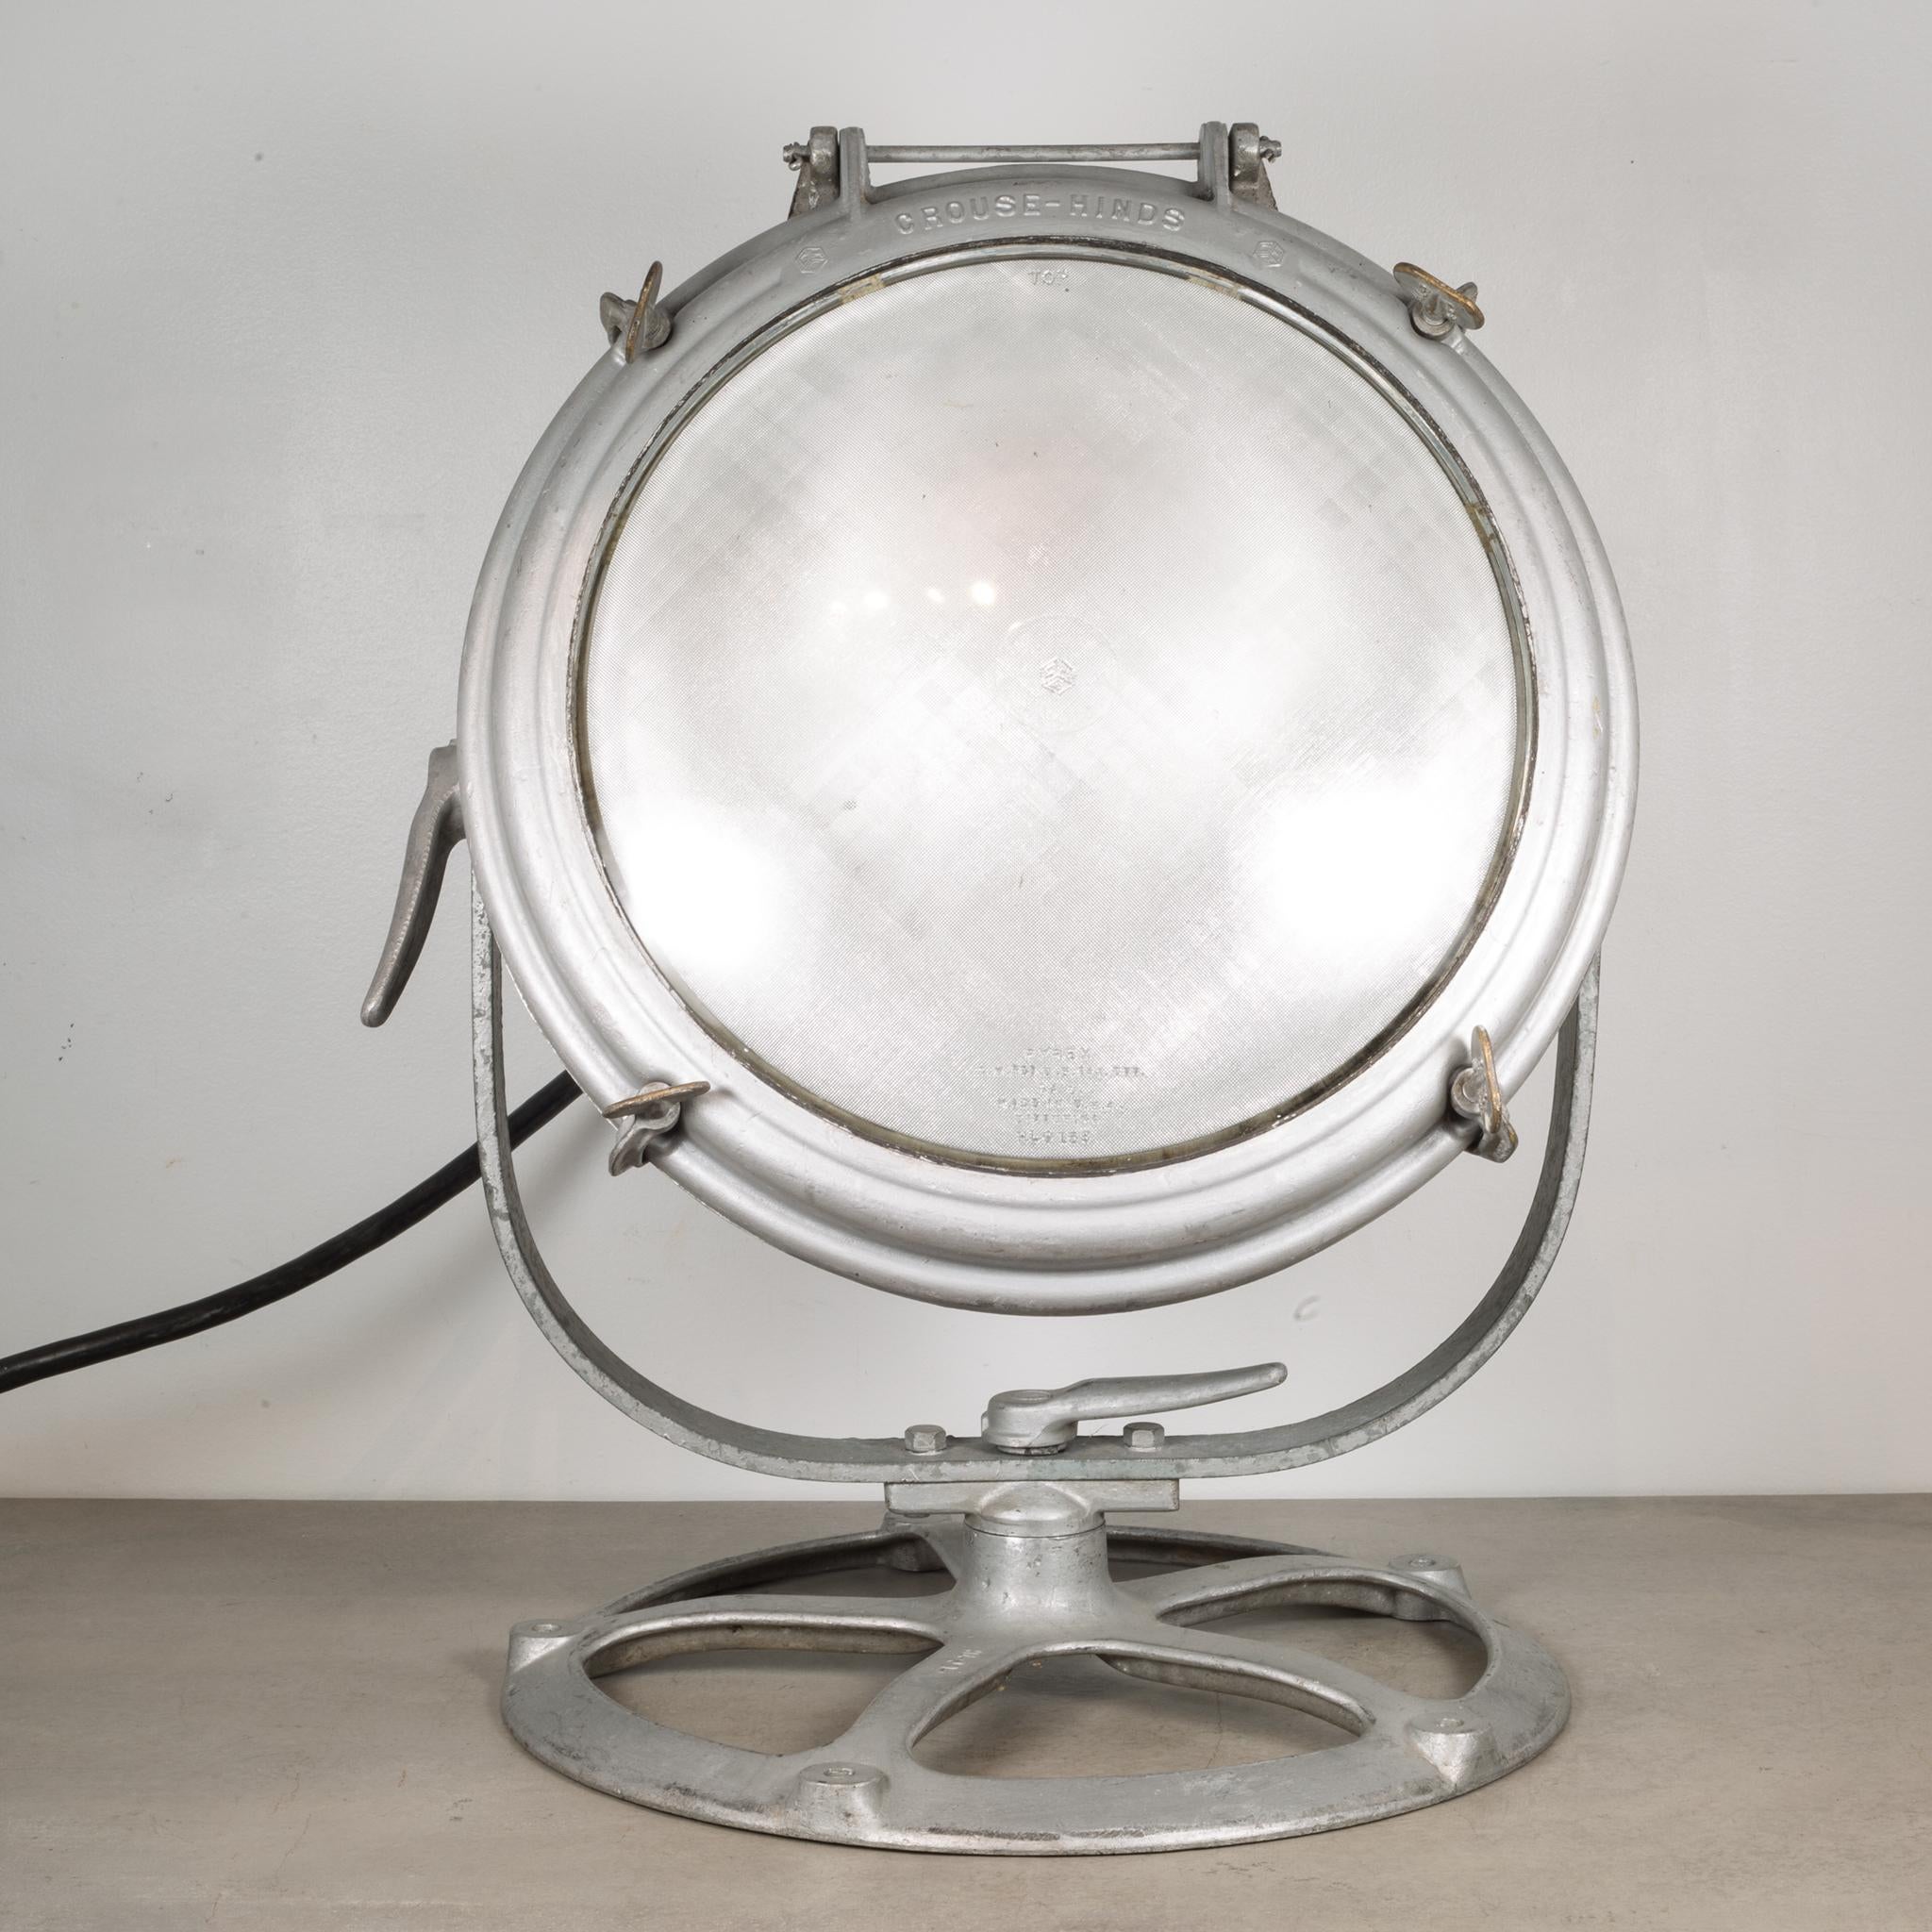 About:

This is an original U.S. Navy spot light by Crouse Hinds. It has a fully adjustable head that tilts and swivels. It is mounted on a round base with a diffused, glass Pyrex lens. 

Creator: Crouse Hinds, U.S.A.
Date of manufacture: circa